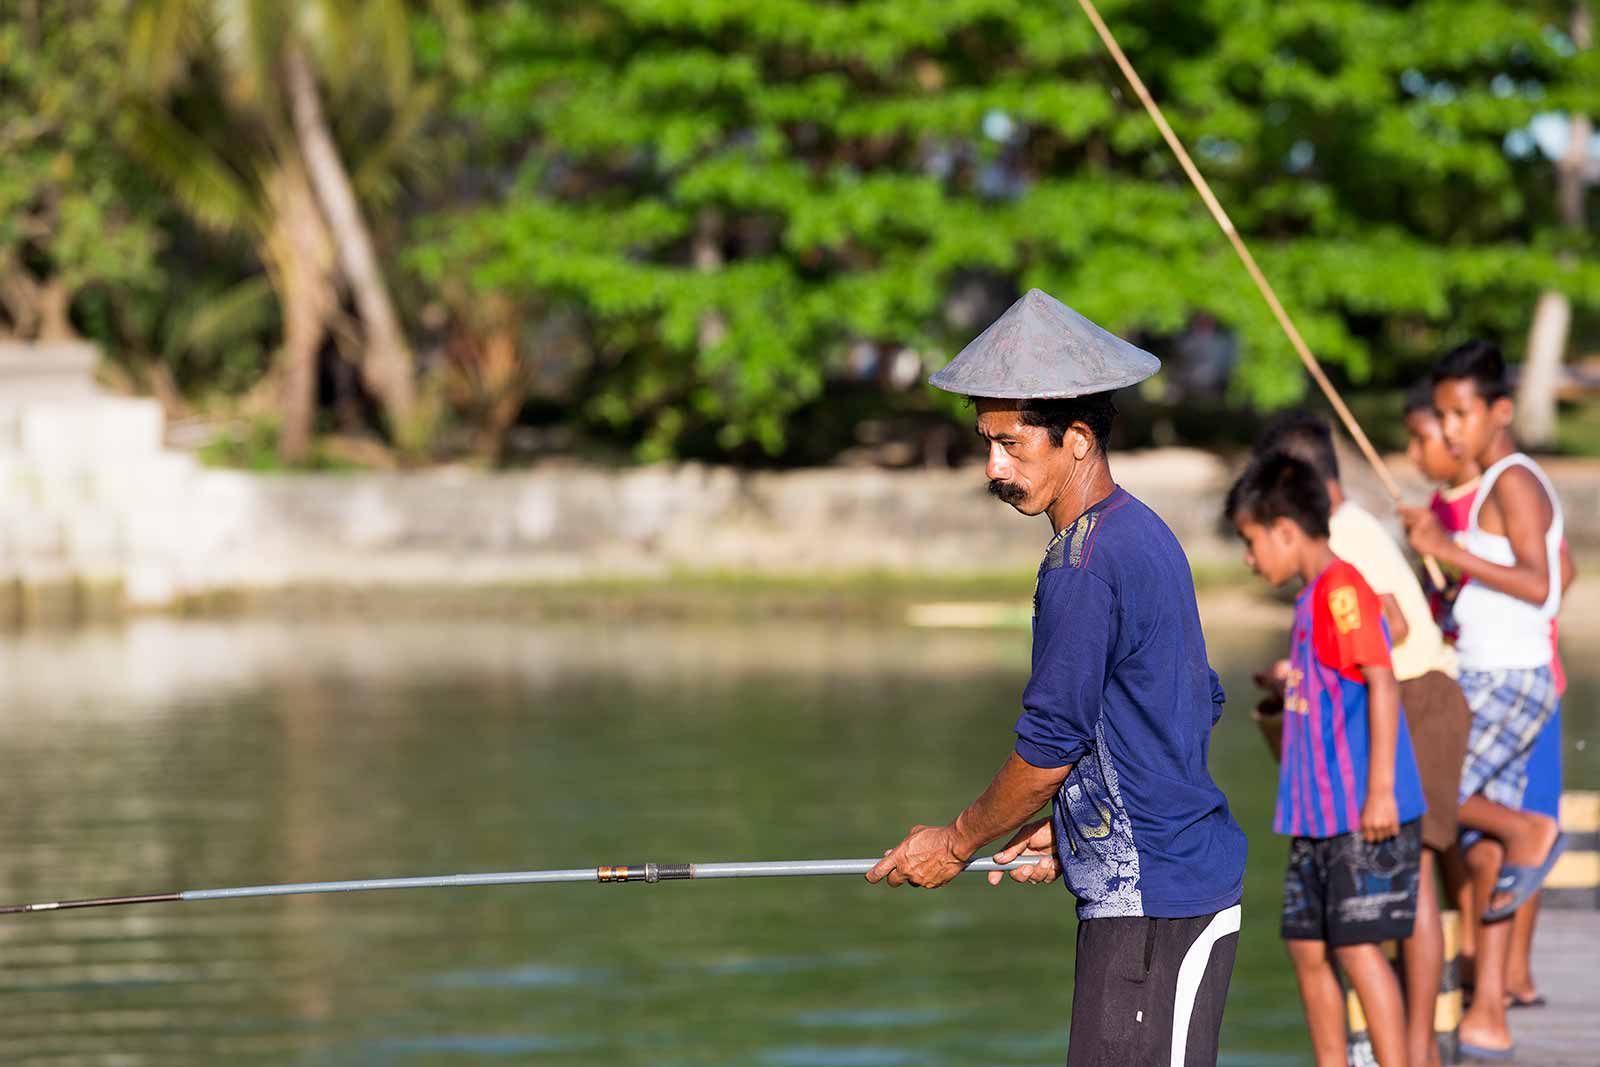 Maluku Islands: Fishermen along the jetty can be seen pretty much everywhere along the islands.